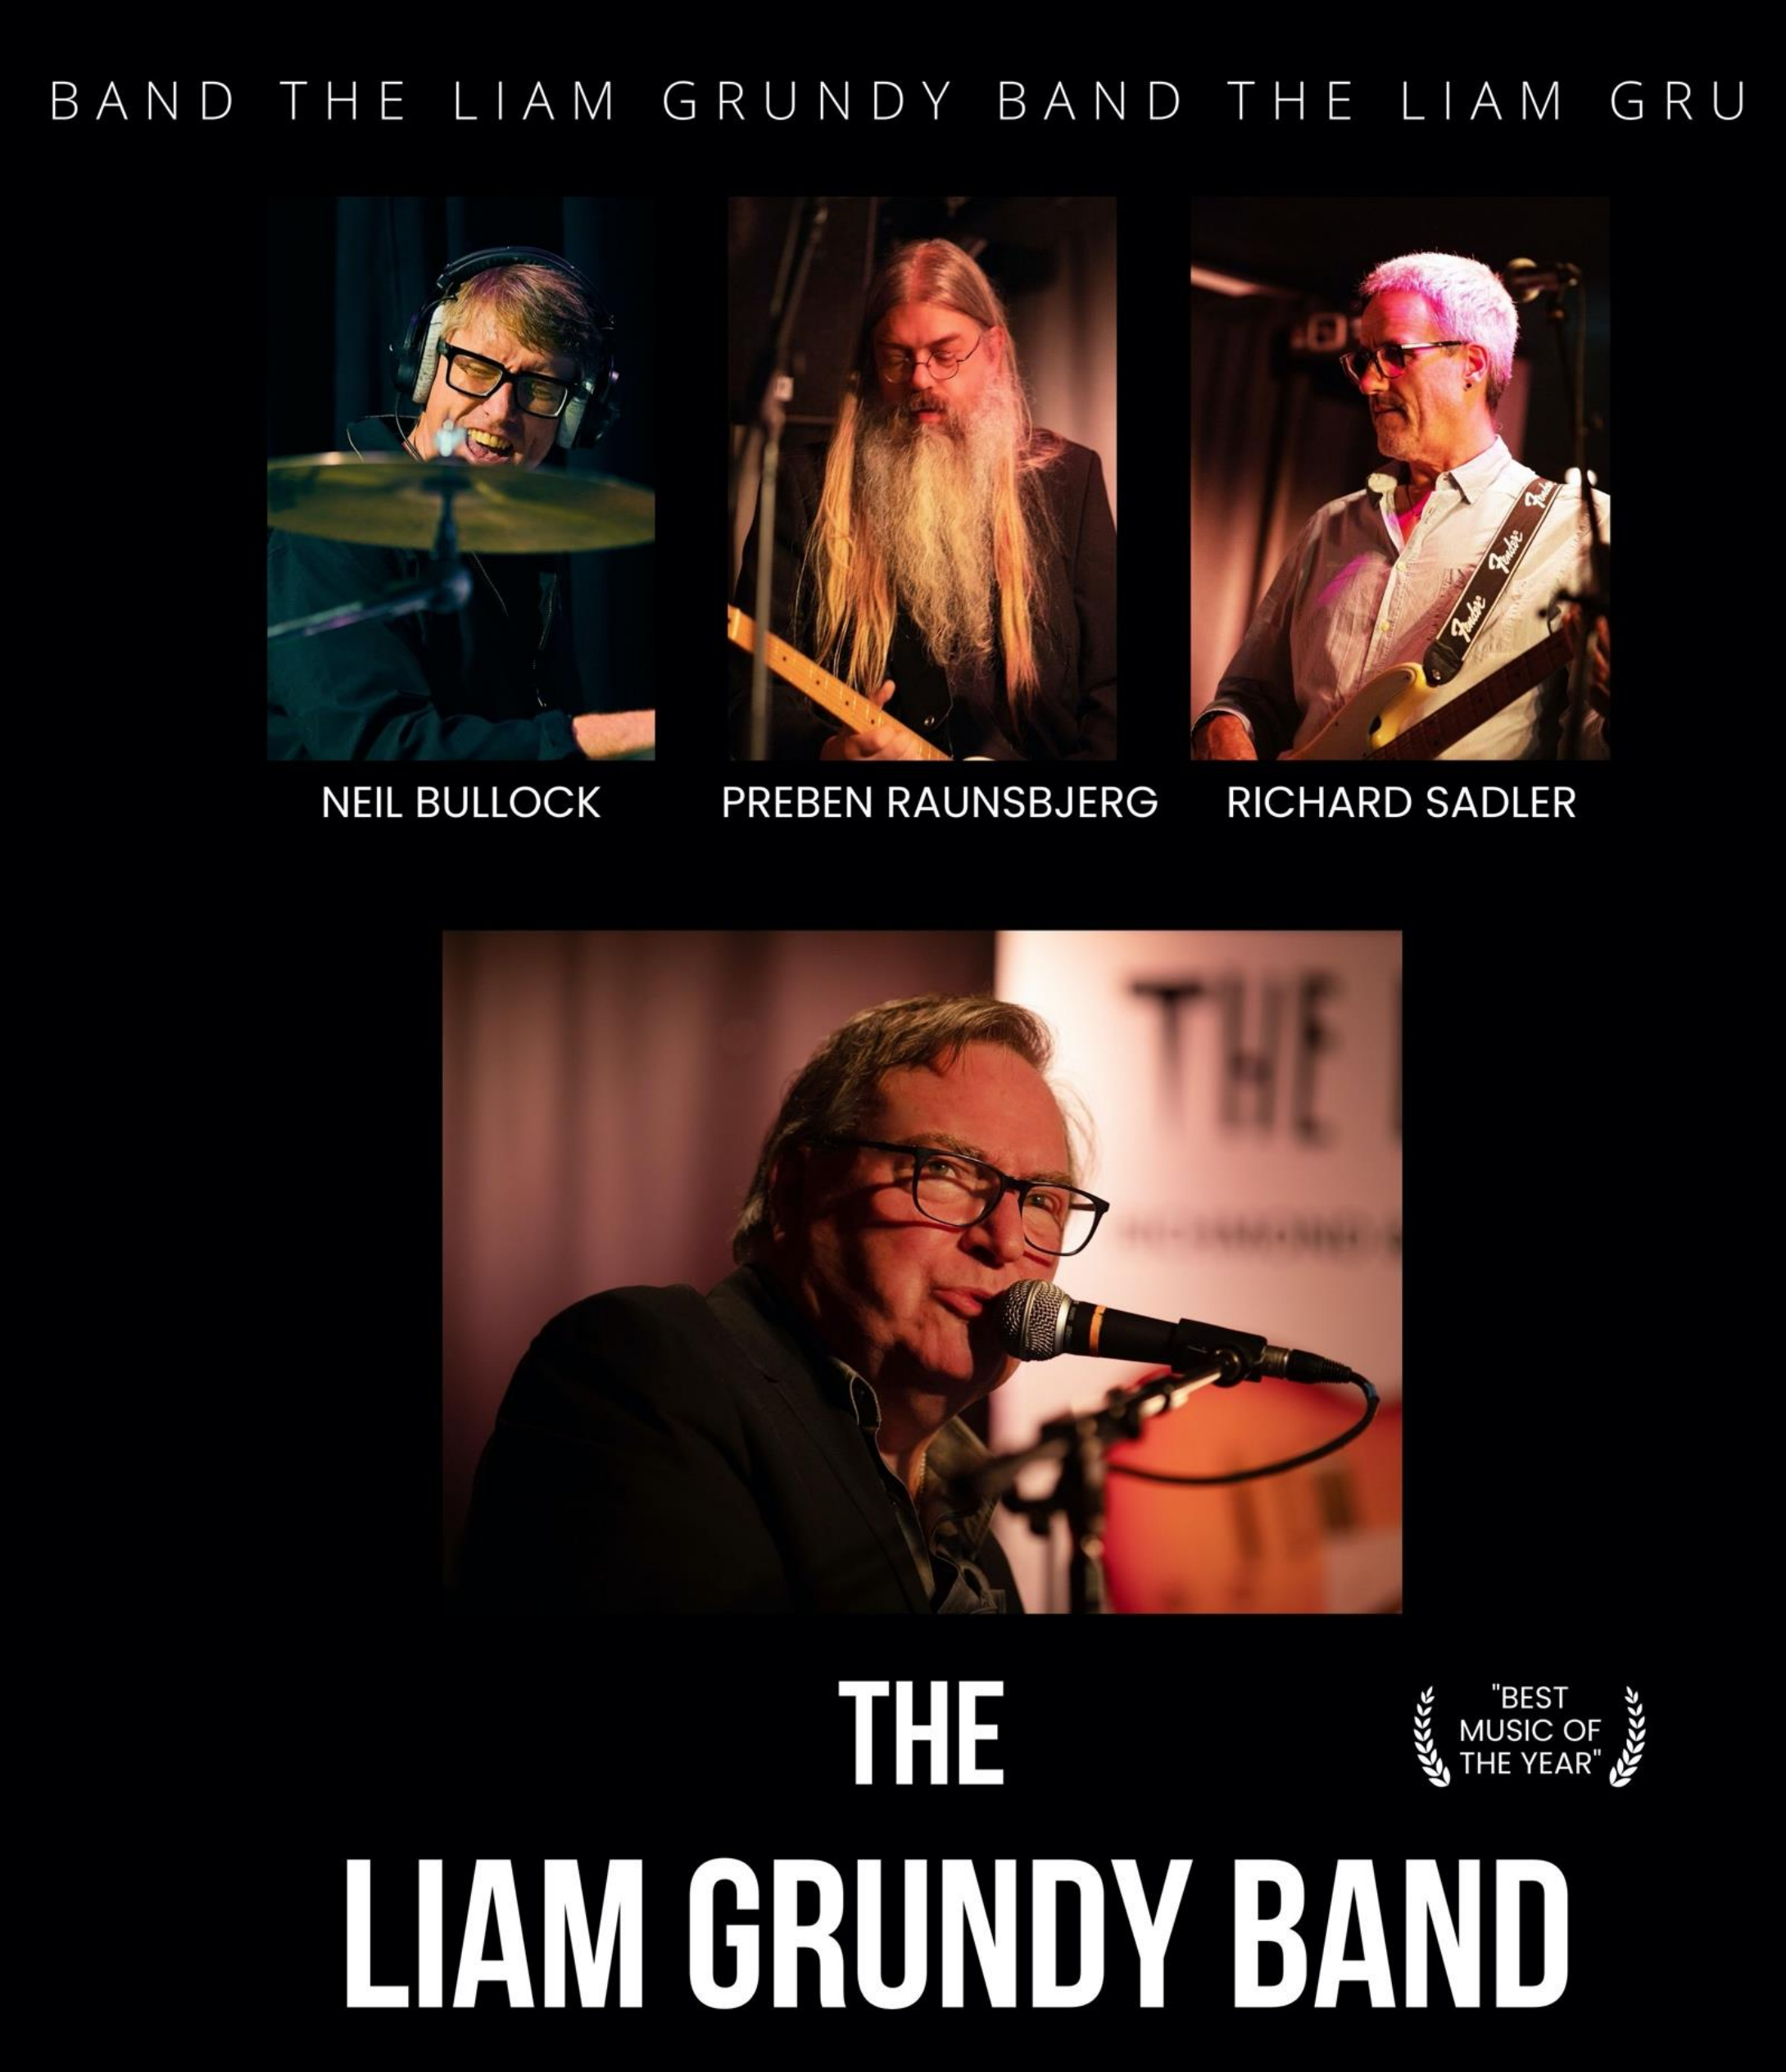 The Liam Grundy Band